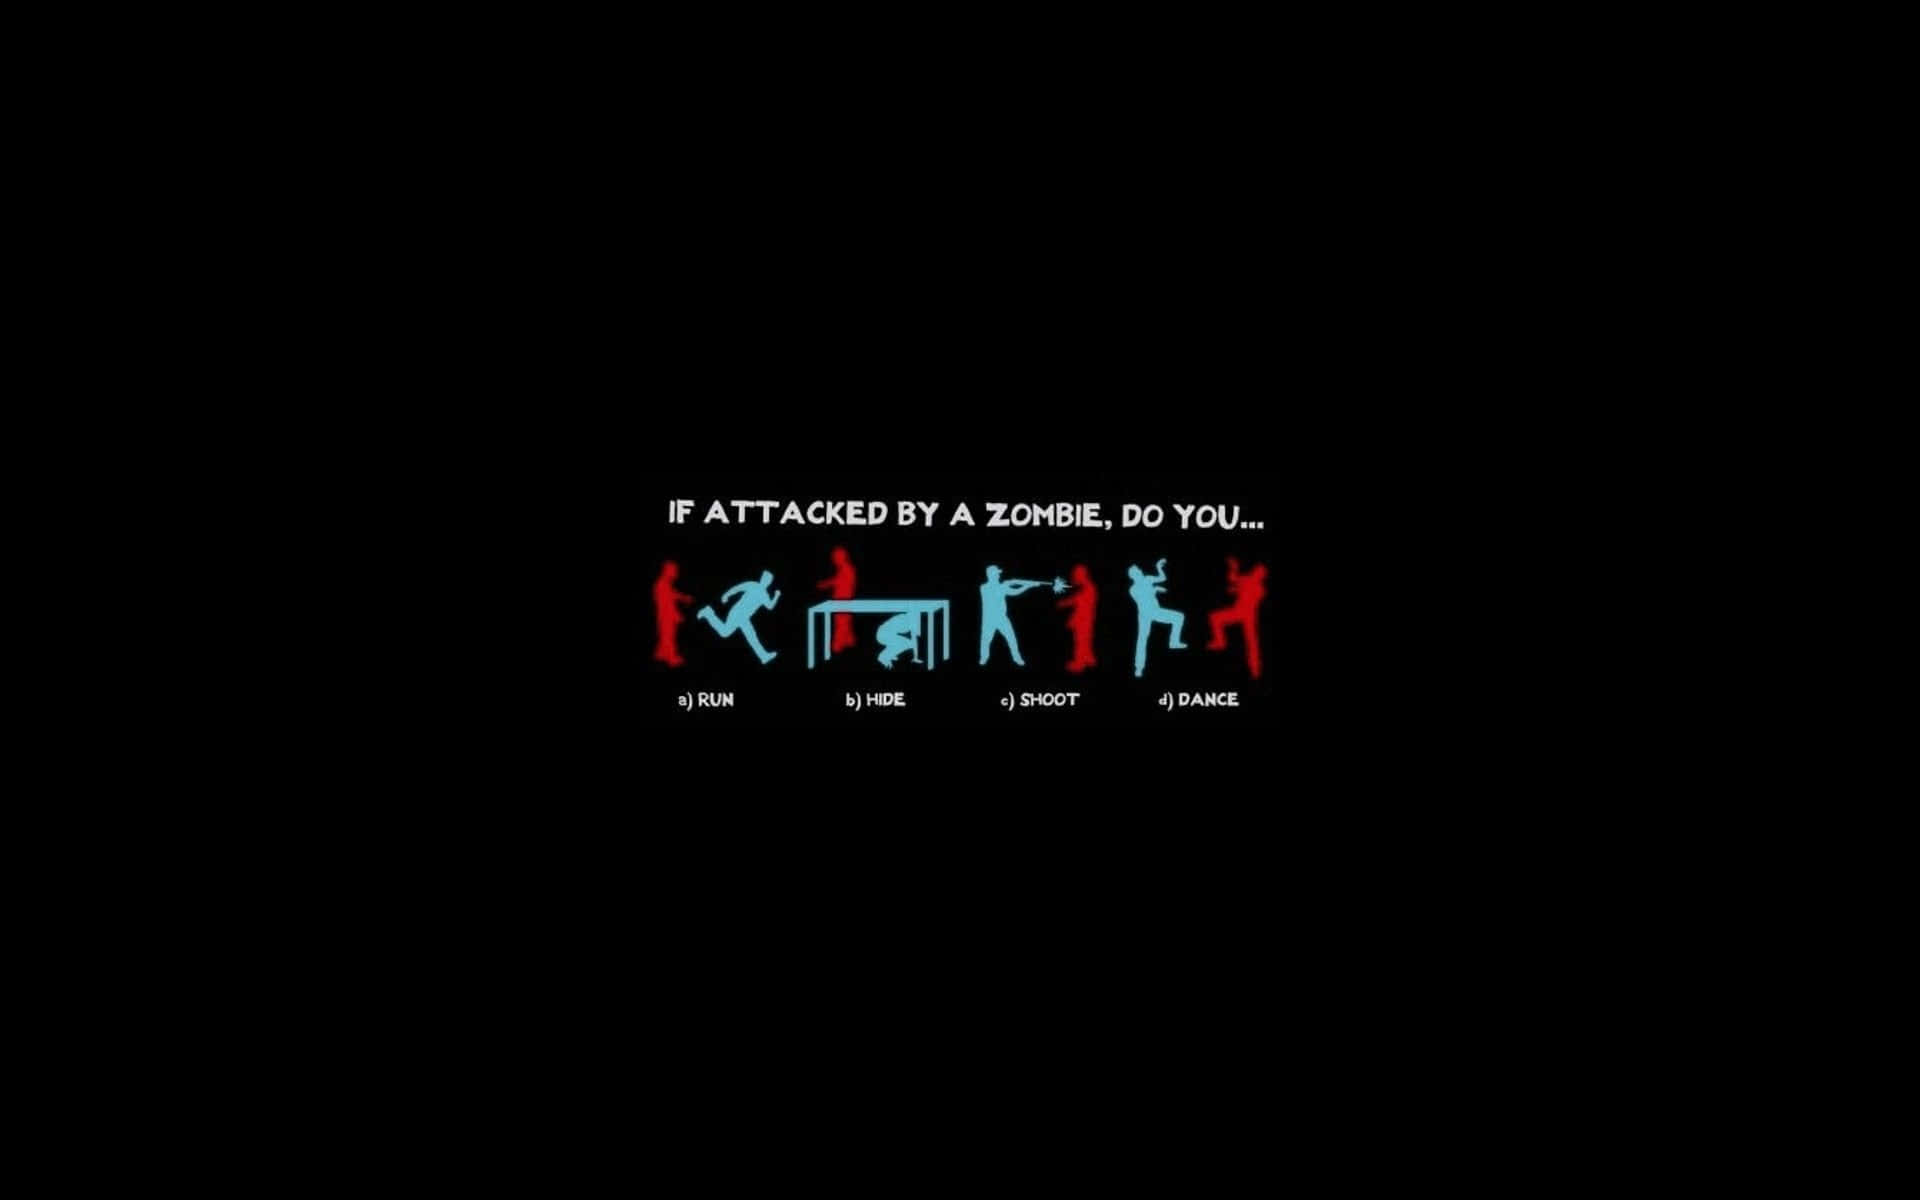 Zombie Attack Response Options Wallpaper